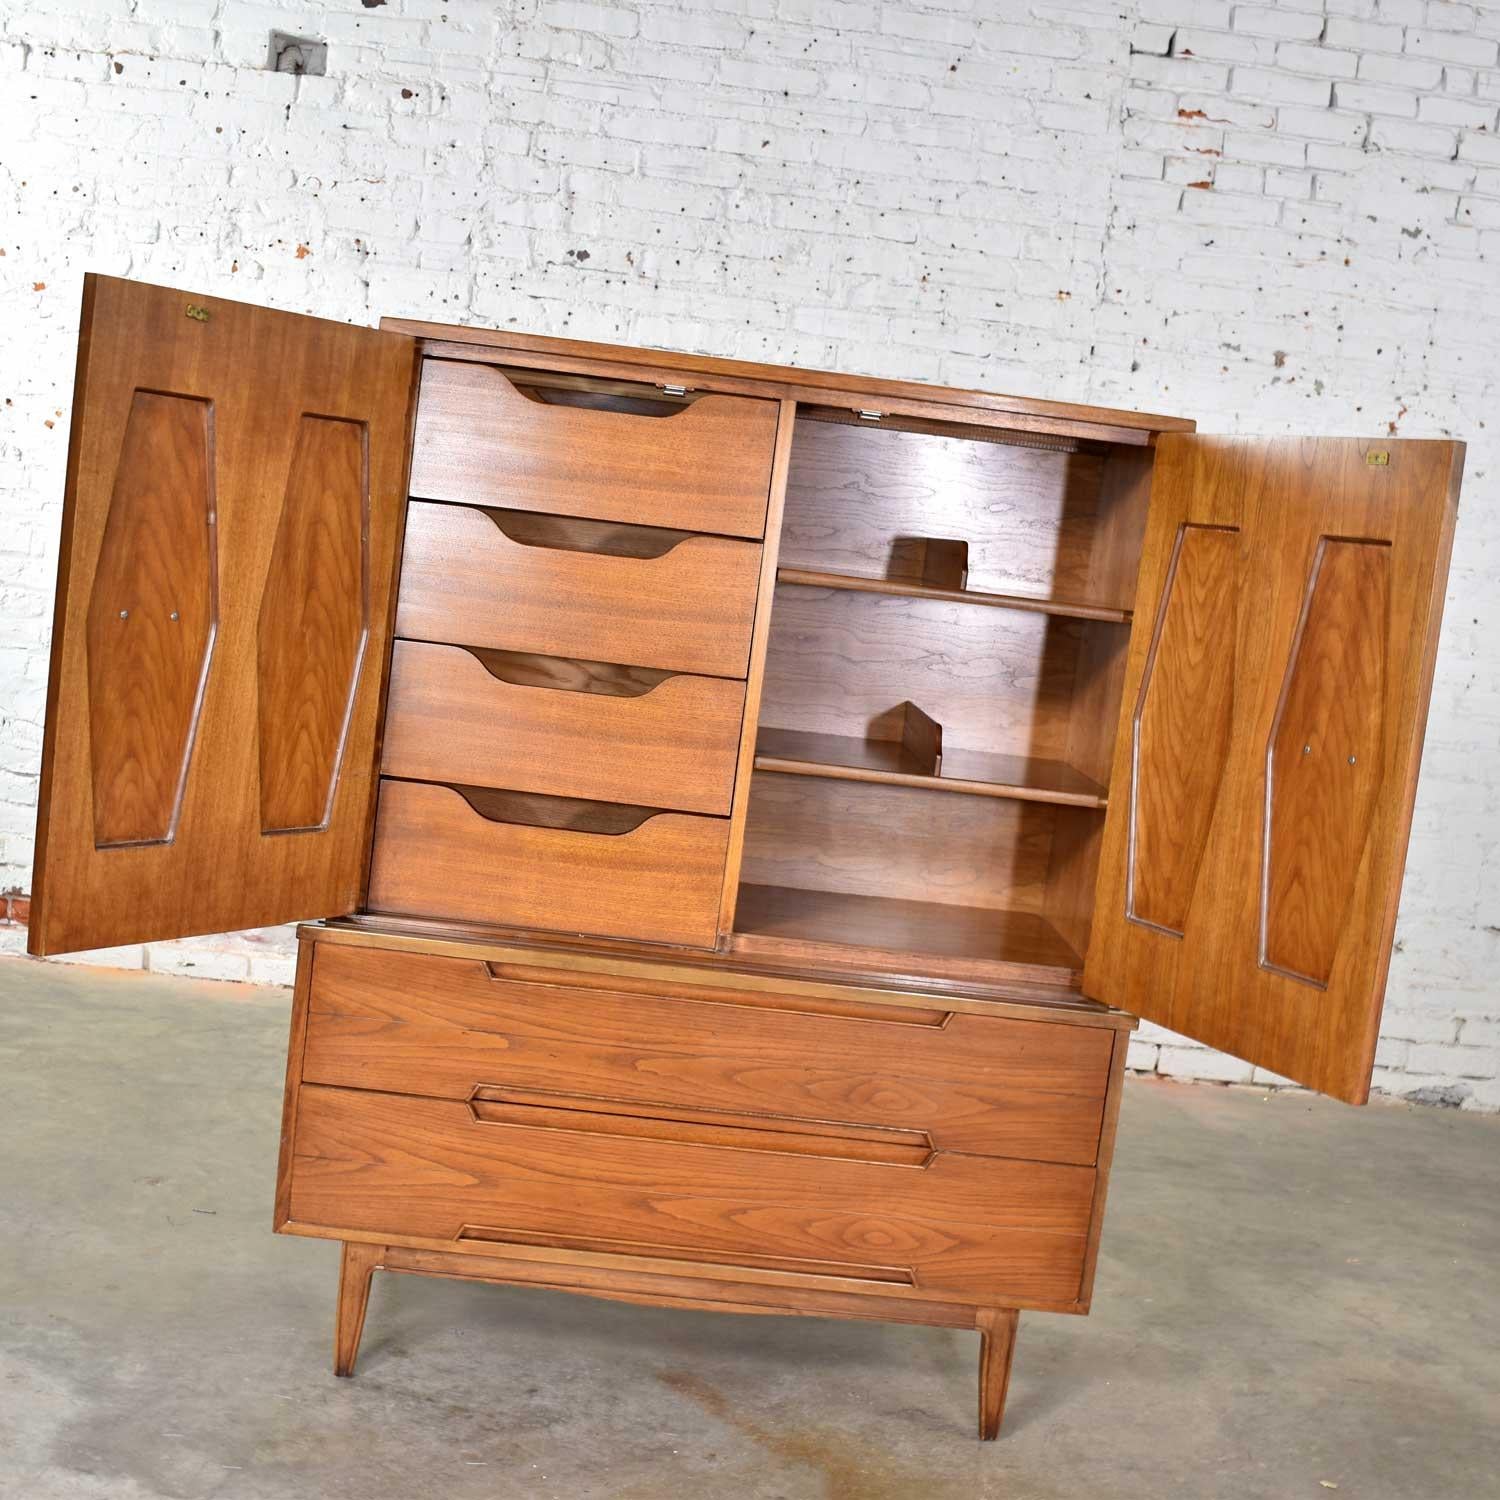 American Midcentury Gentlemen’s Chest with Hexagon Paneled Design and Brass Hardware For Sale